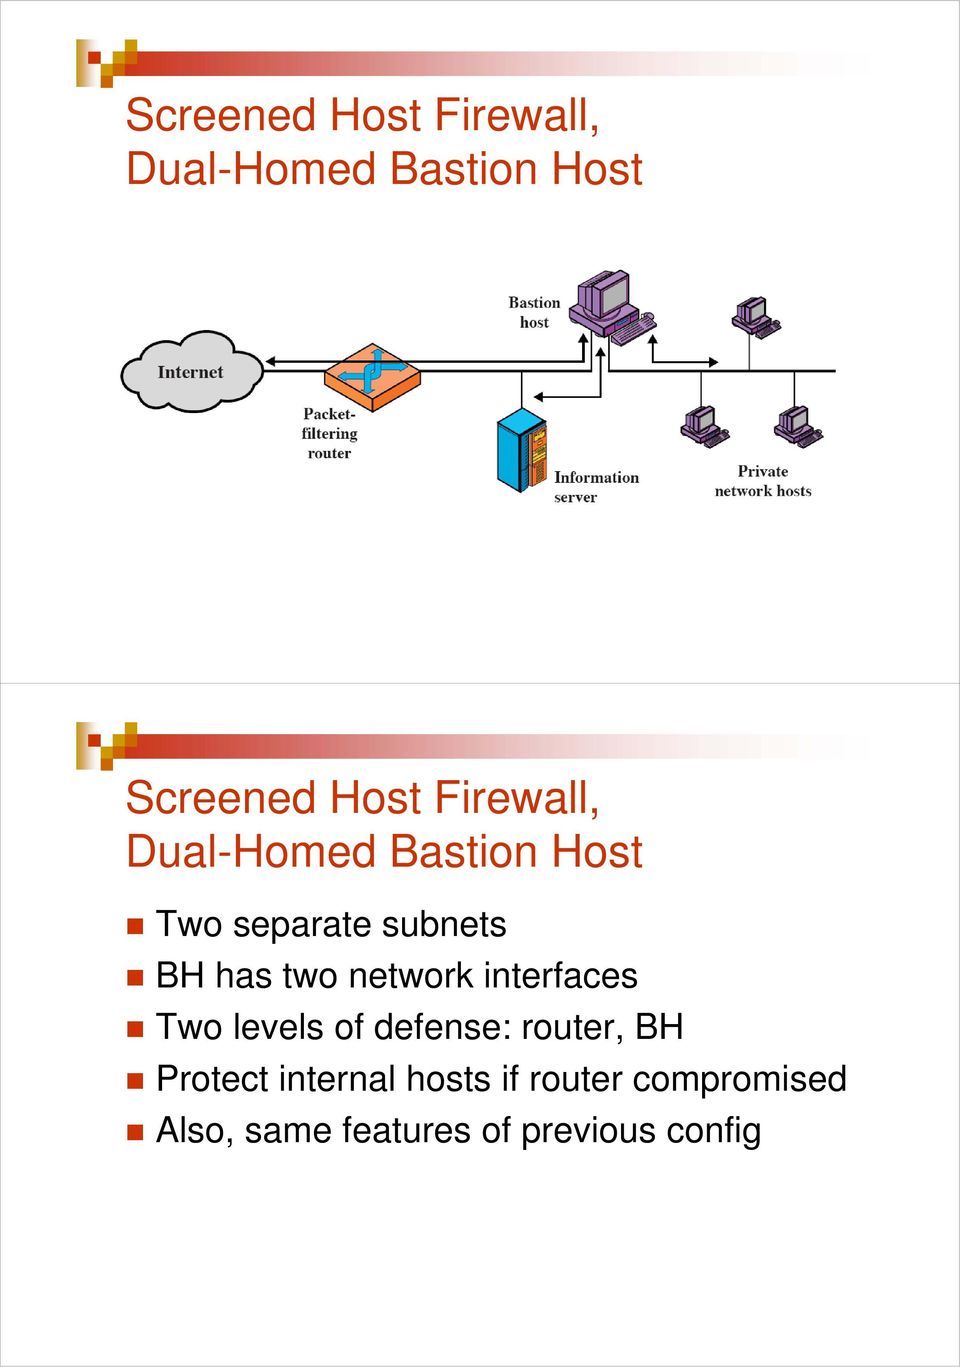 network interfaces Two levels of defense: router, BH Protect